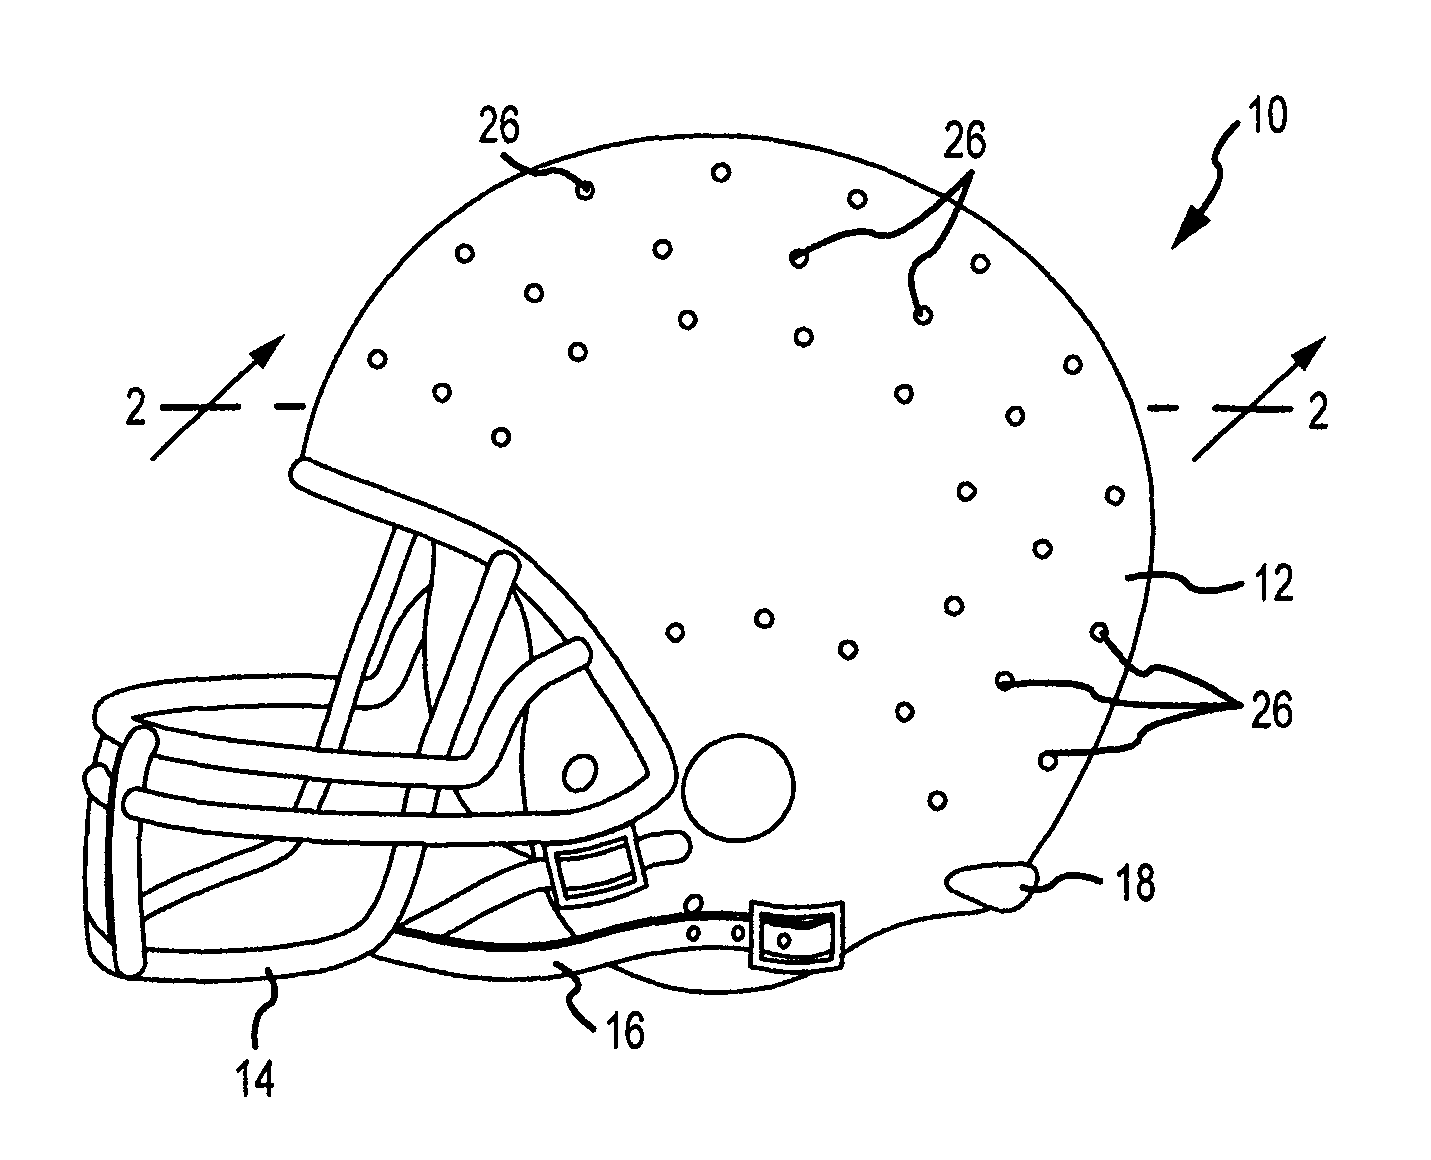 Protective helmet having a microprocessor controlled response to impact